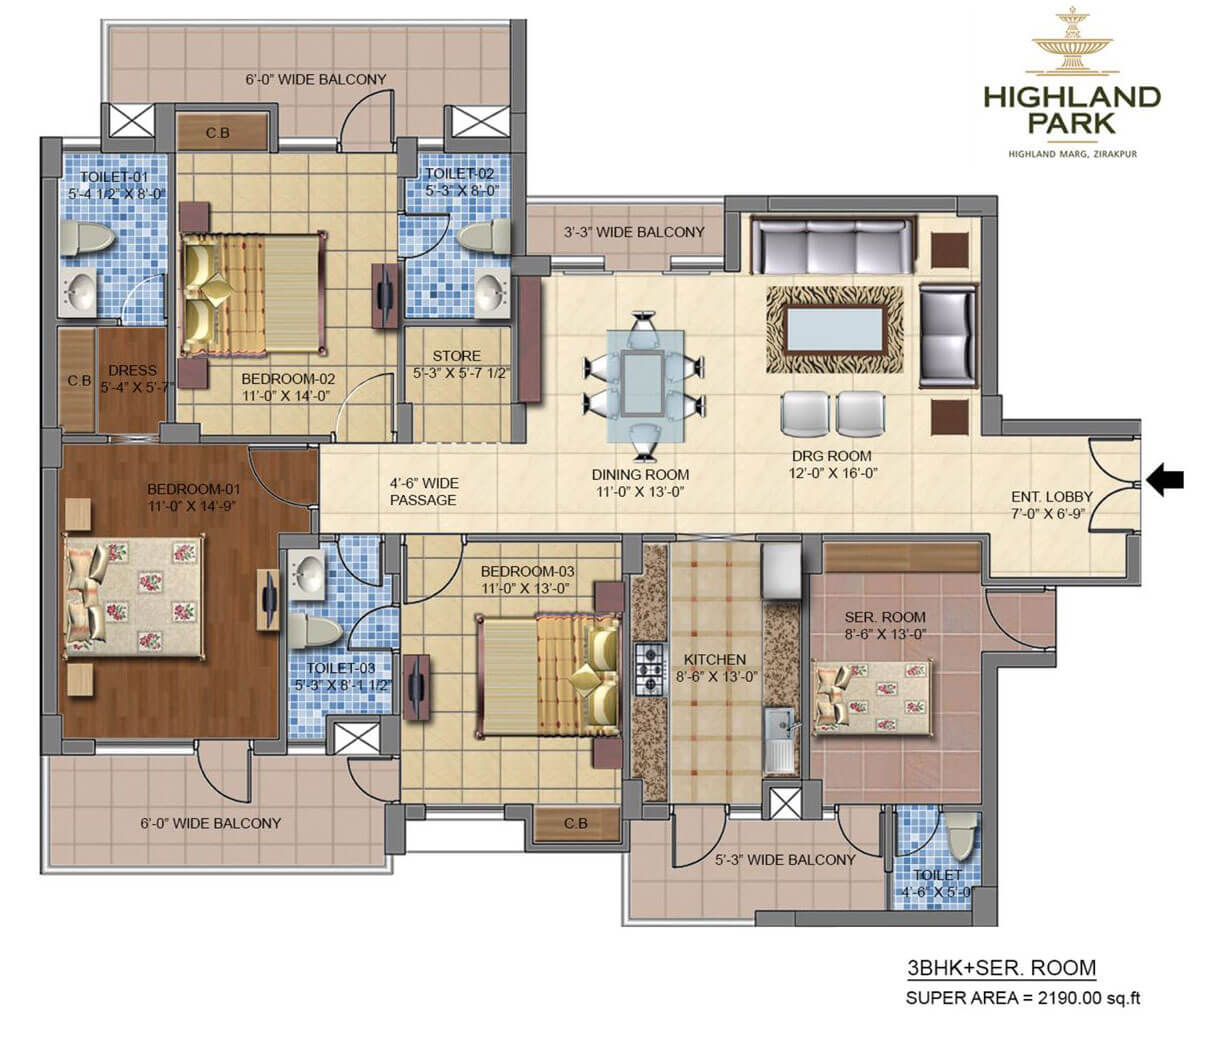 4 BHK Luxury Flats in Zirakpur Highland Park Official Site